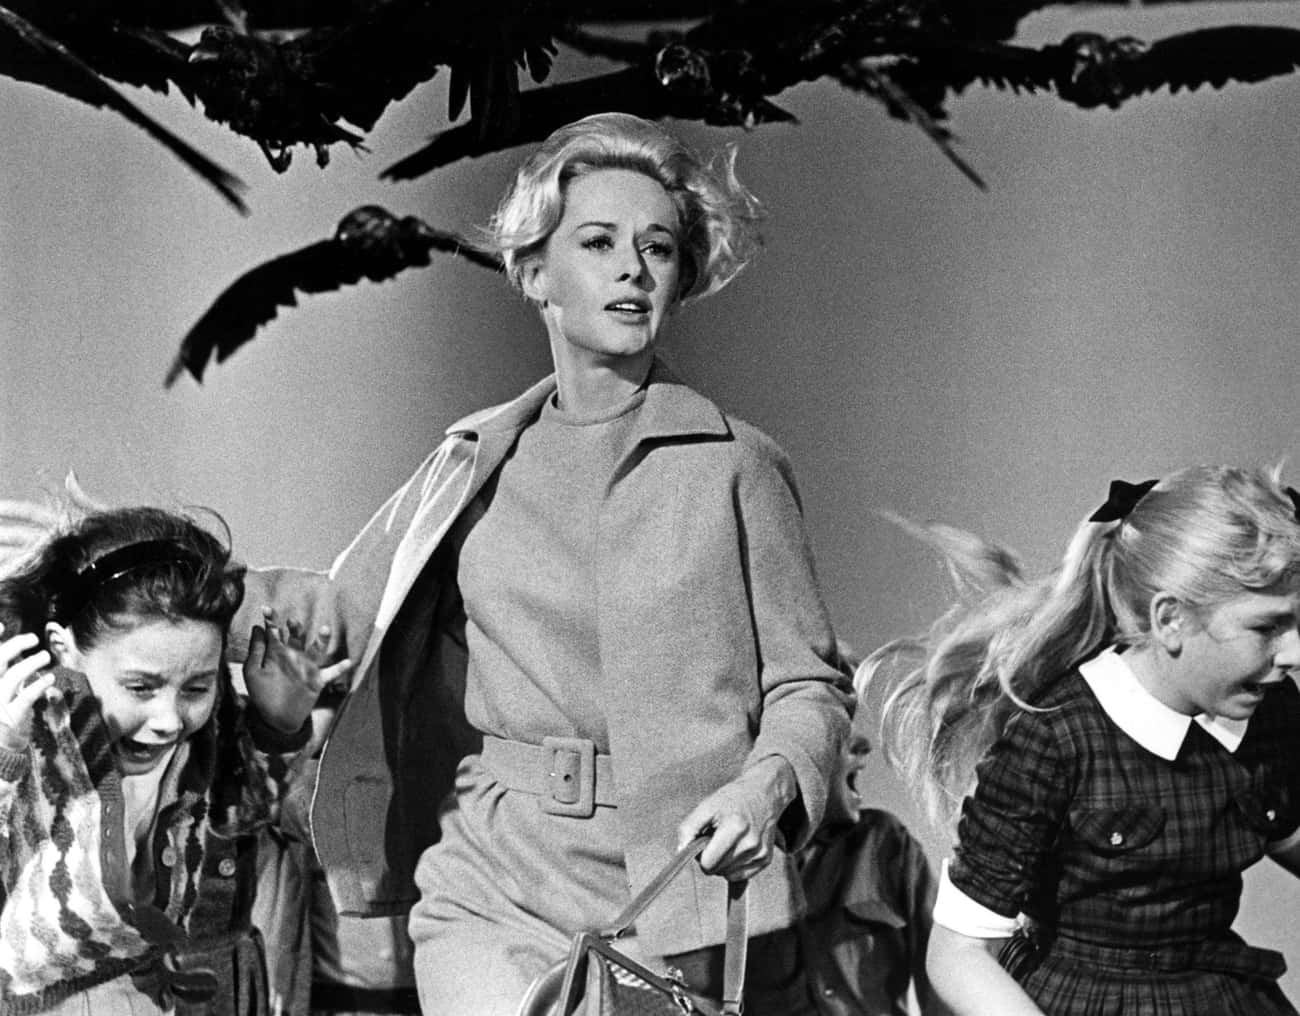 He Terrorized Actress Tippi Hedren And Her Daughter